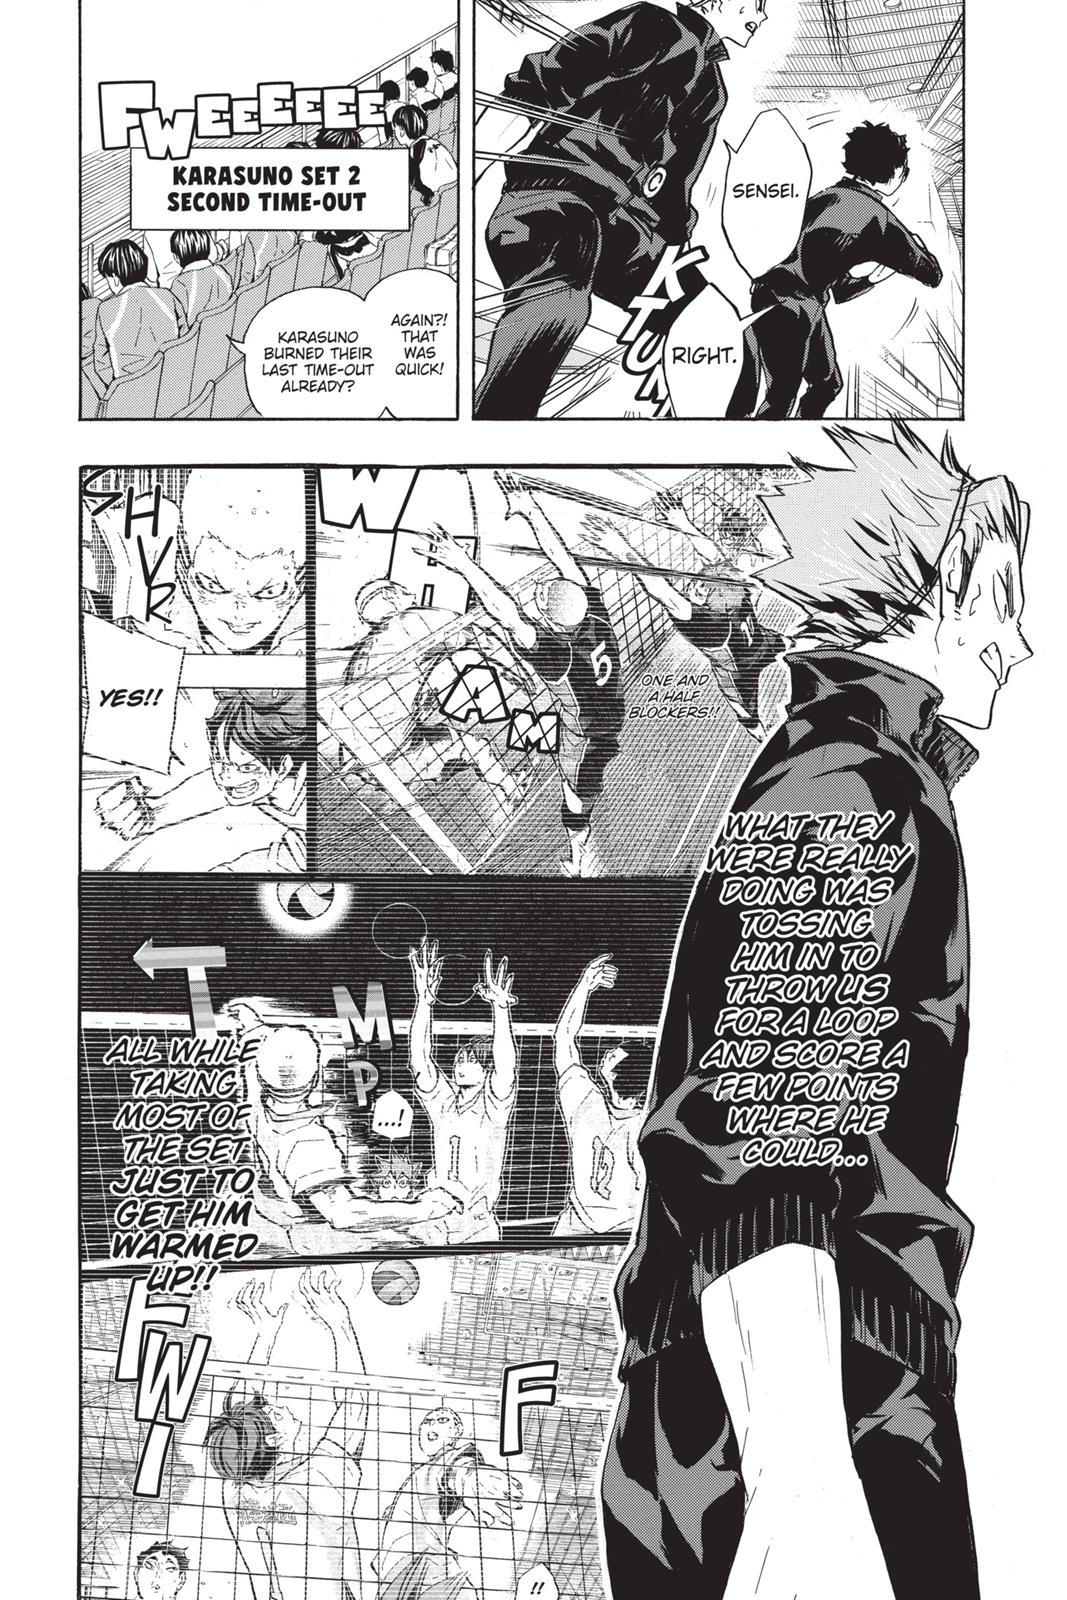  Chapter 135 image 015